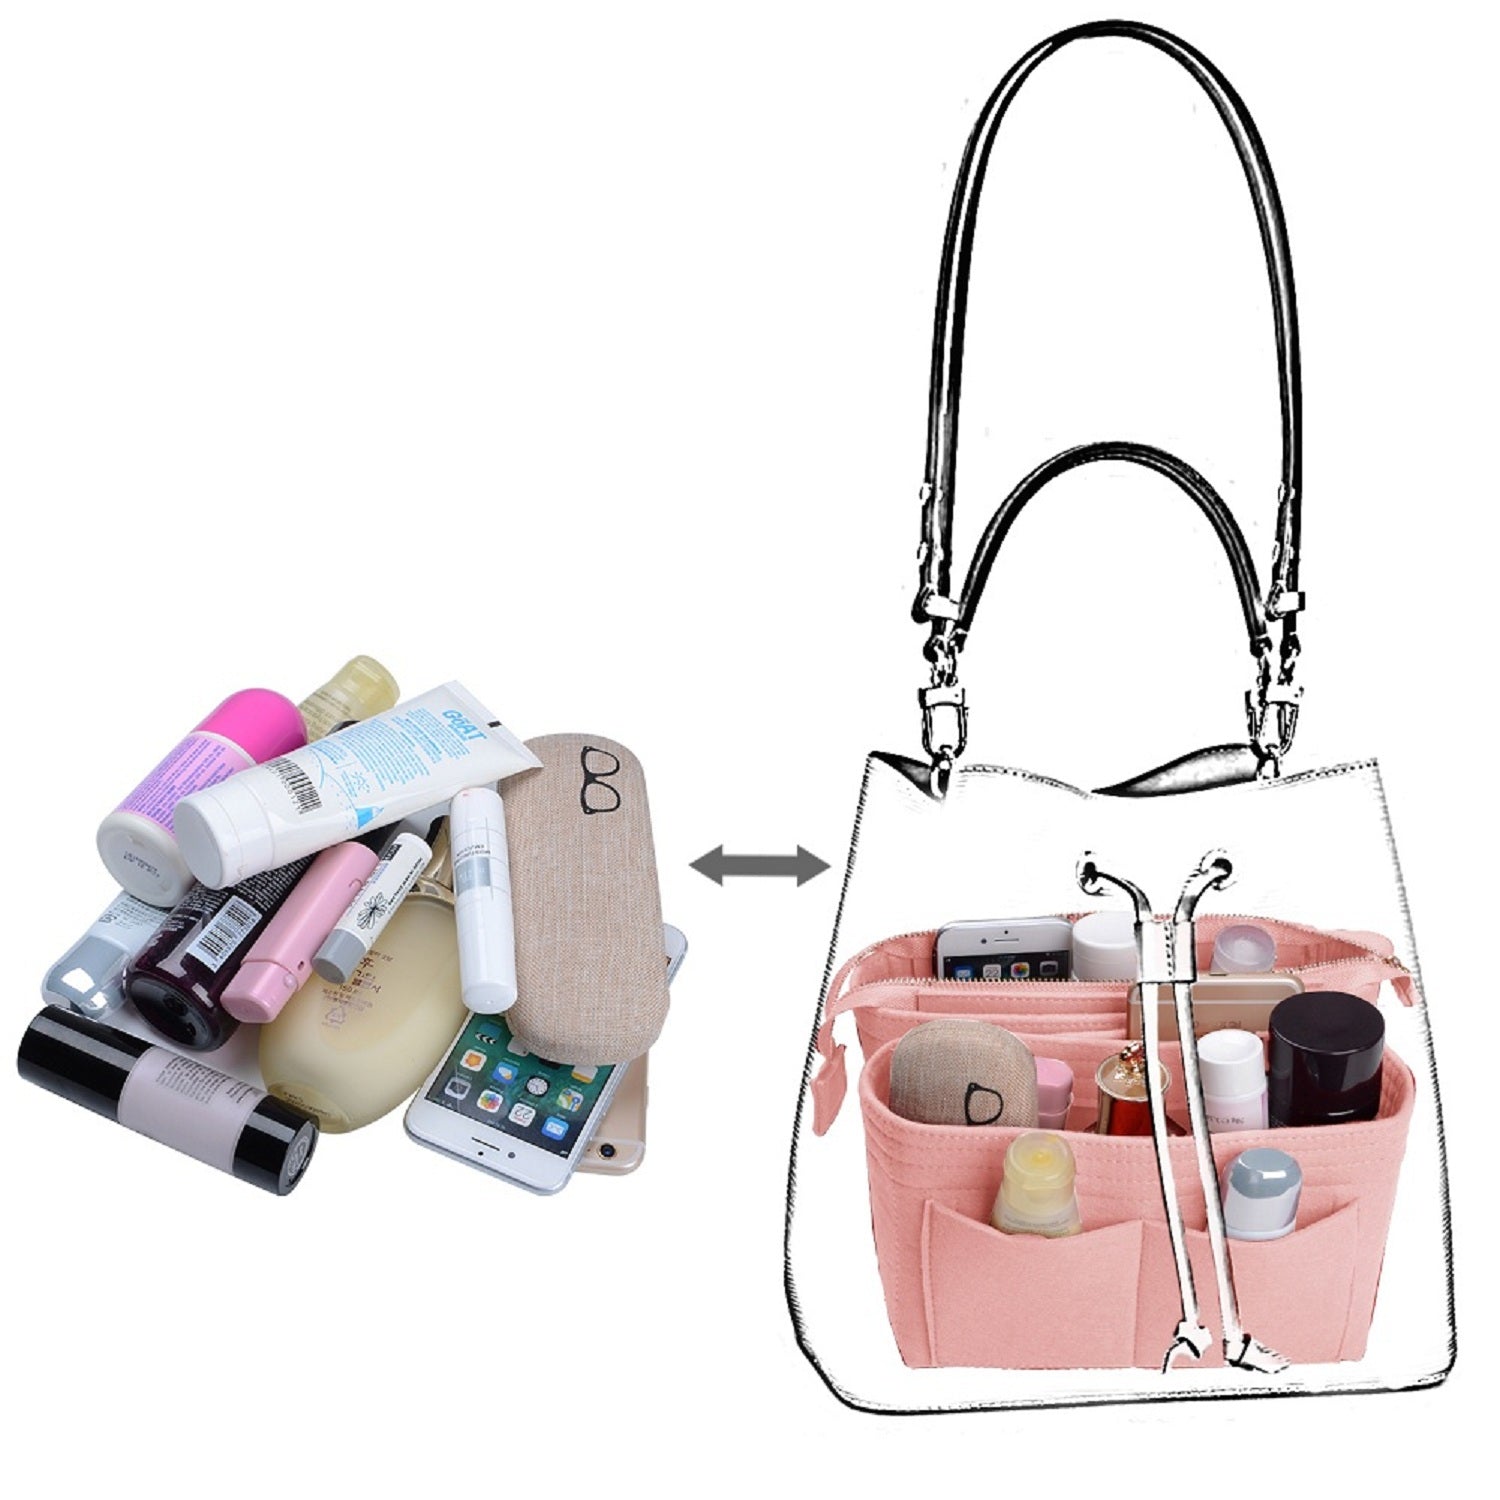 Purse Organizer, Bag in Ba Perfectly Structured Purse Organizer: Bag in Bag Organizer with Two Packs in One Set for LV NeoNoe Noé Seriesg Organizer With 2 Packs In One Set For LV NeoNoe Noé Series perfectly